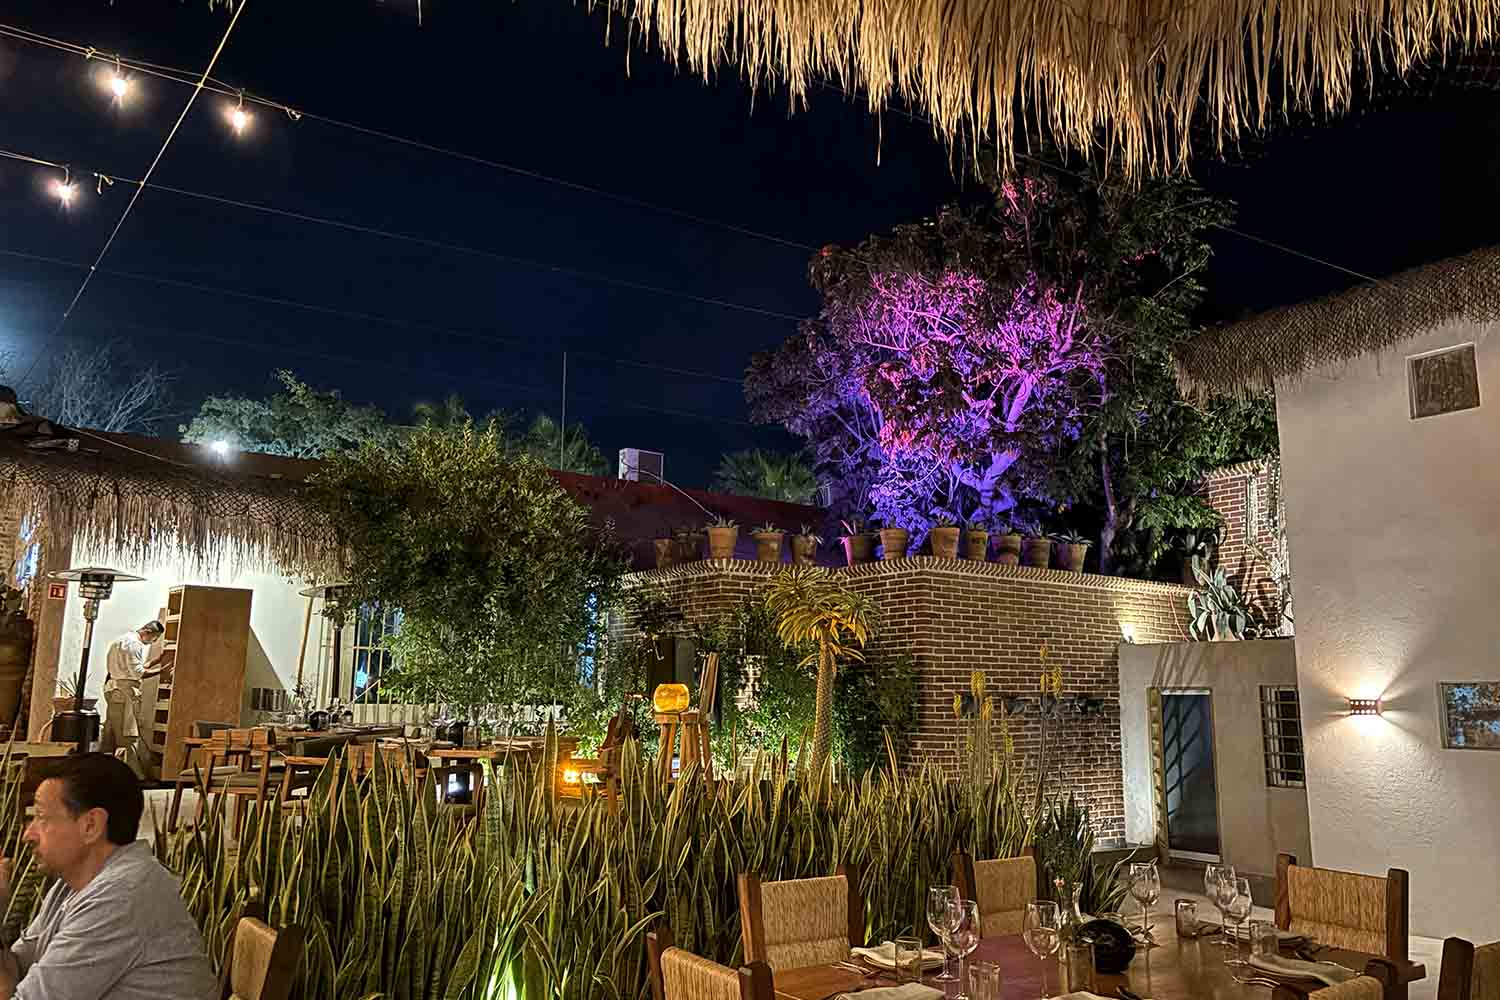 Don Sanchez is modern take on Mexican cuisine, here seen at night